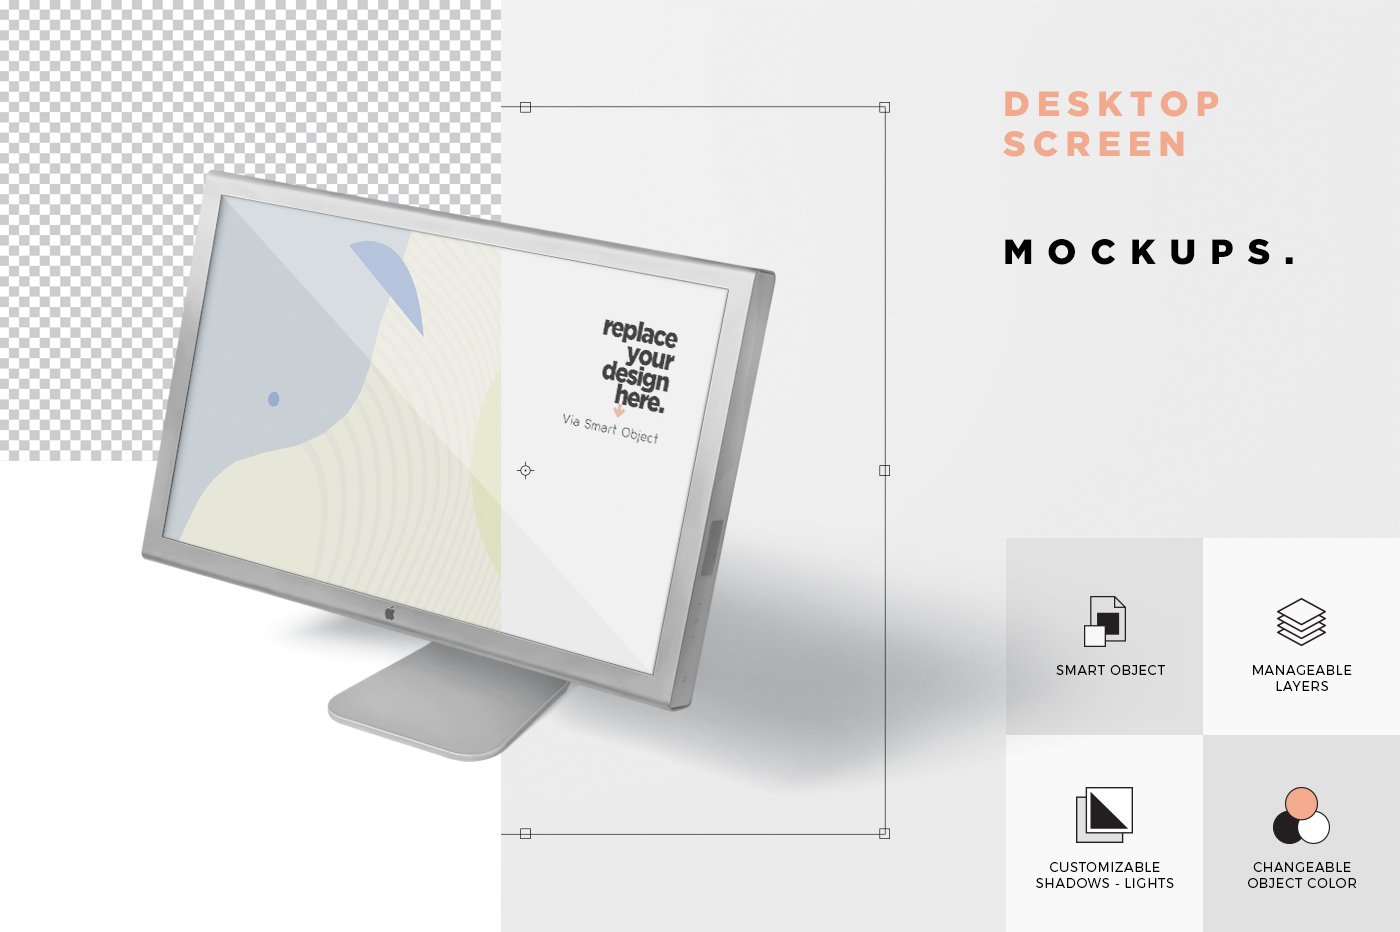 mockup features image 417